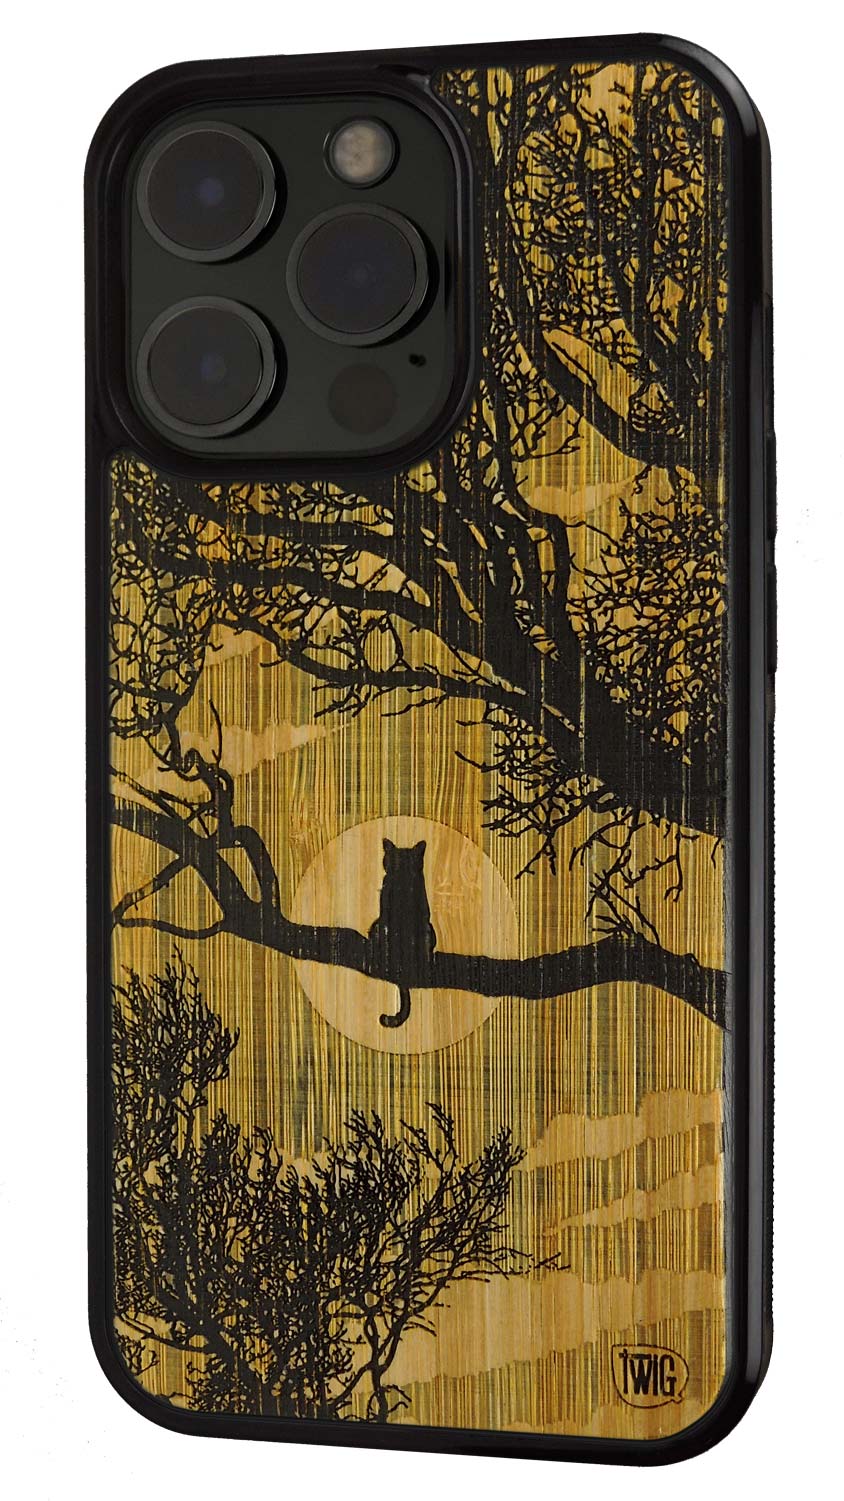 Harvest Moon - Bamboo iPhone Case, iPhone Case - Twig Case Co.